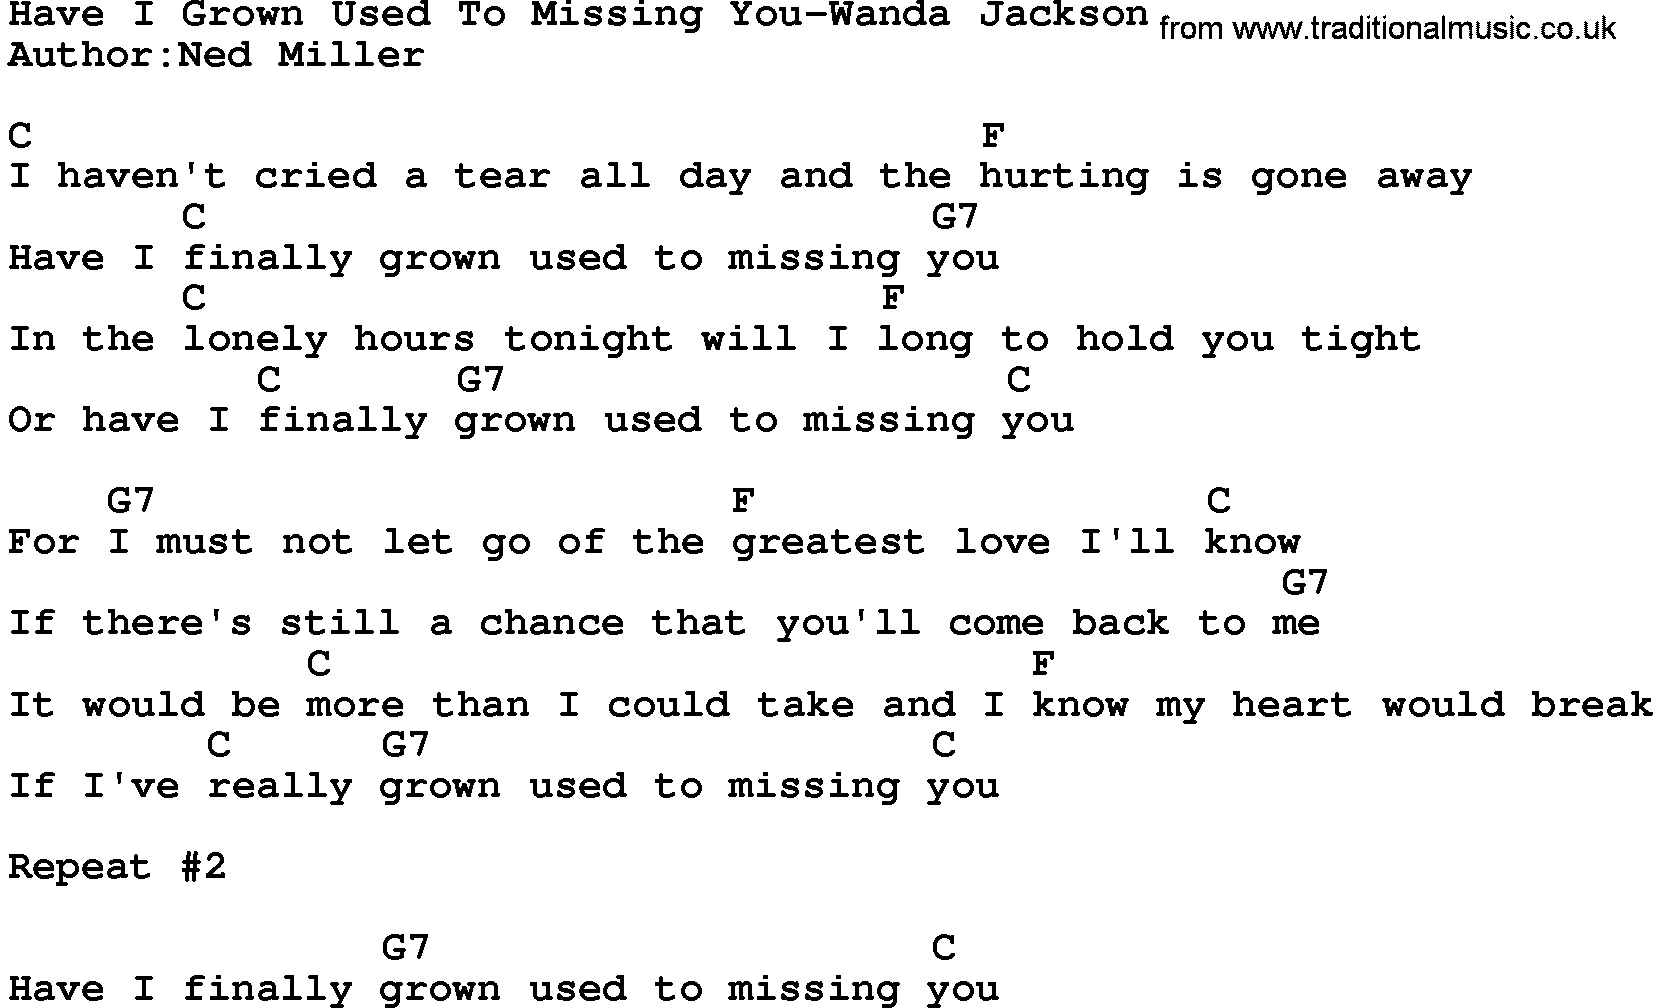 Country music song: Have I Grown Used To Missing You-Wanda Jackson lyrics and chords